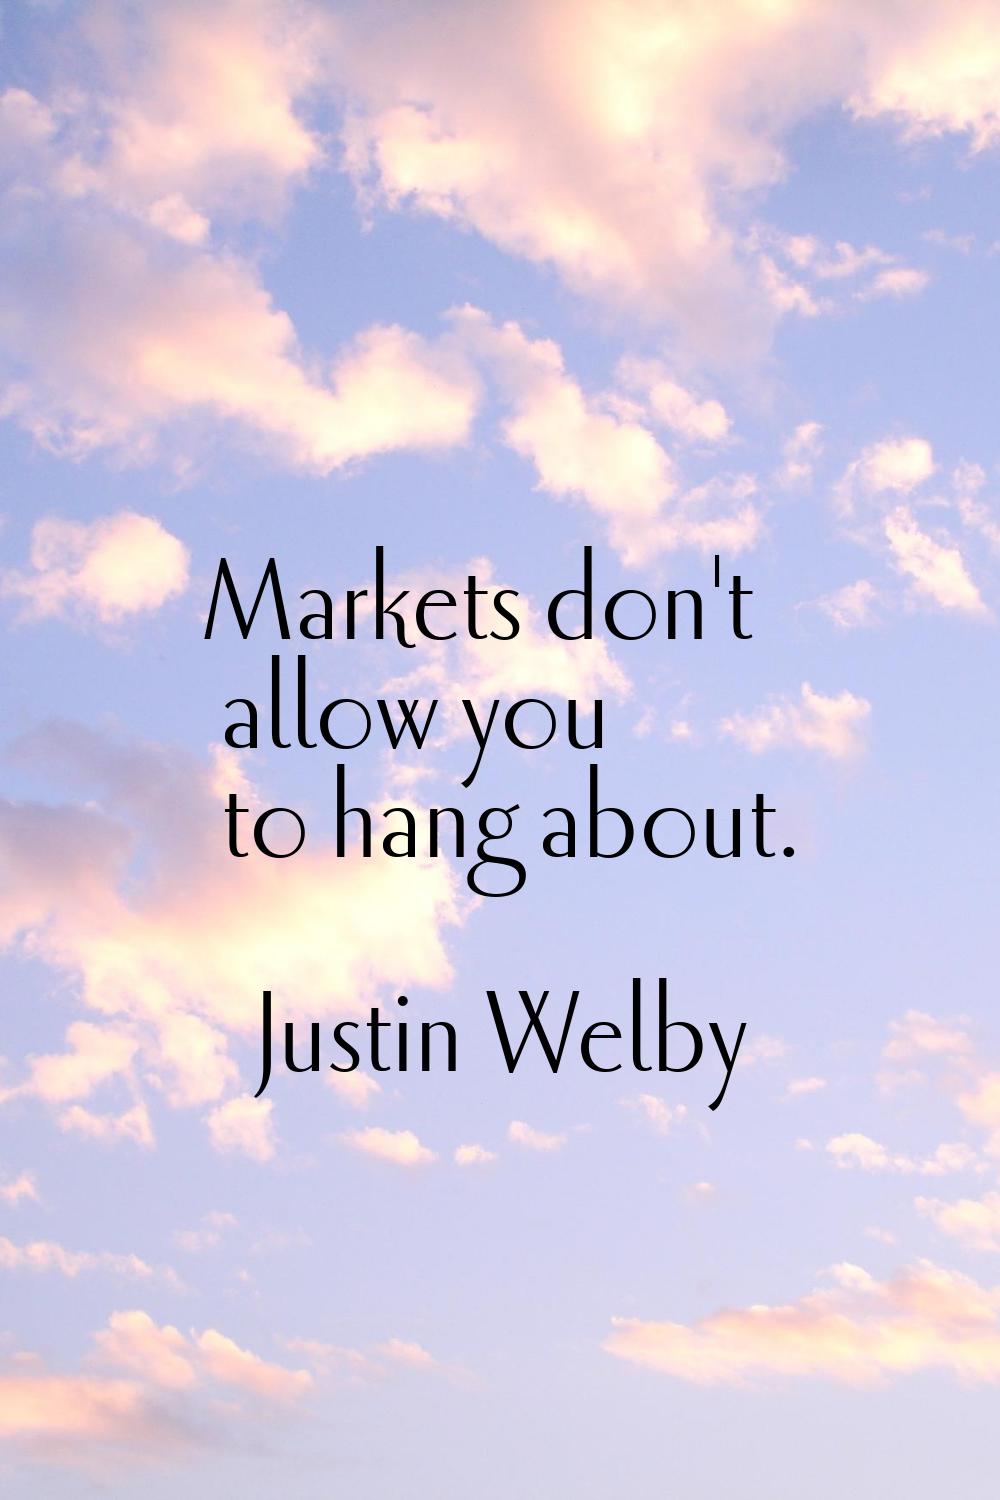 Markets don't allow you to hang about.